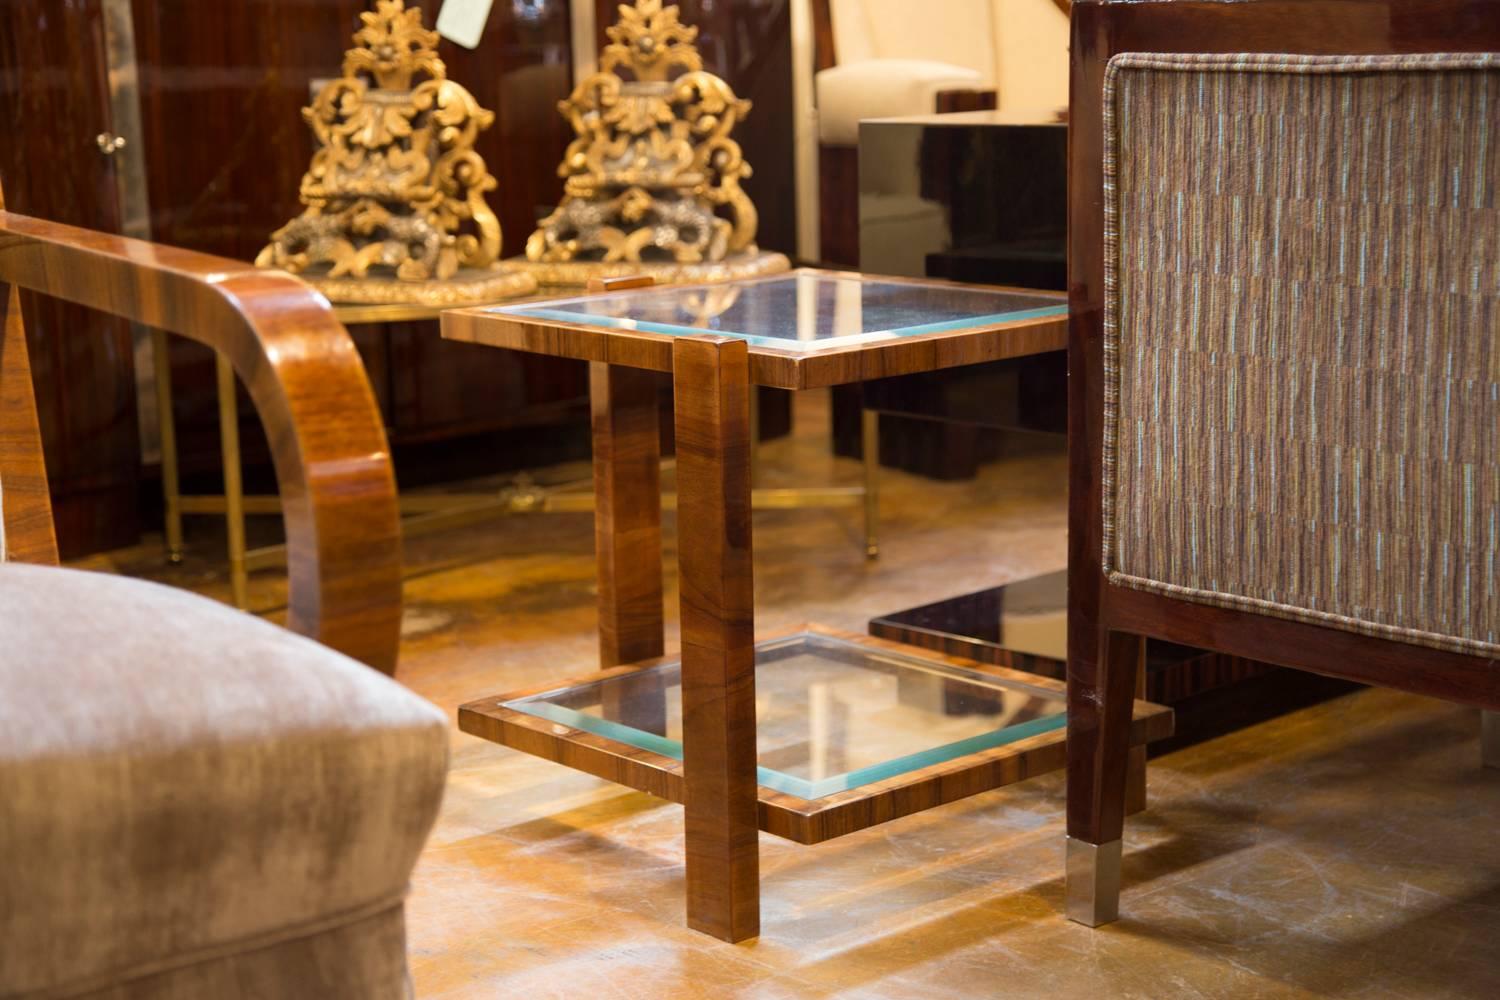 This pair of contemporary two-tiered end tables made of walnut and glass features square shaped beveled glass tops surrounded by beautifully veneered walnut frames. Each table features three straight legs ingeniously placed in various positions with